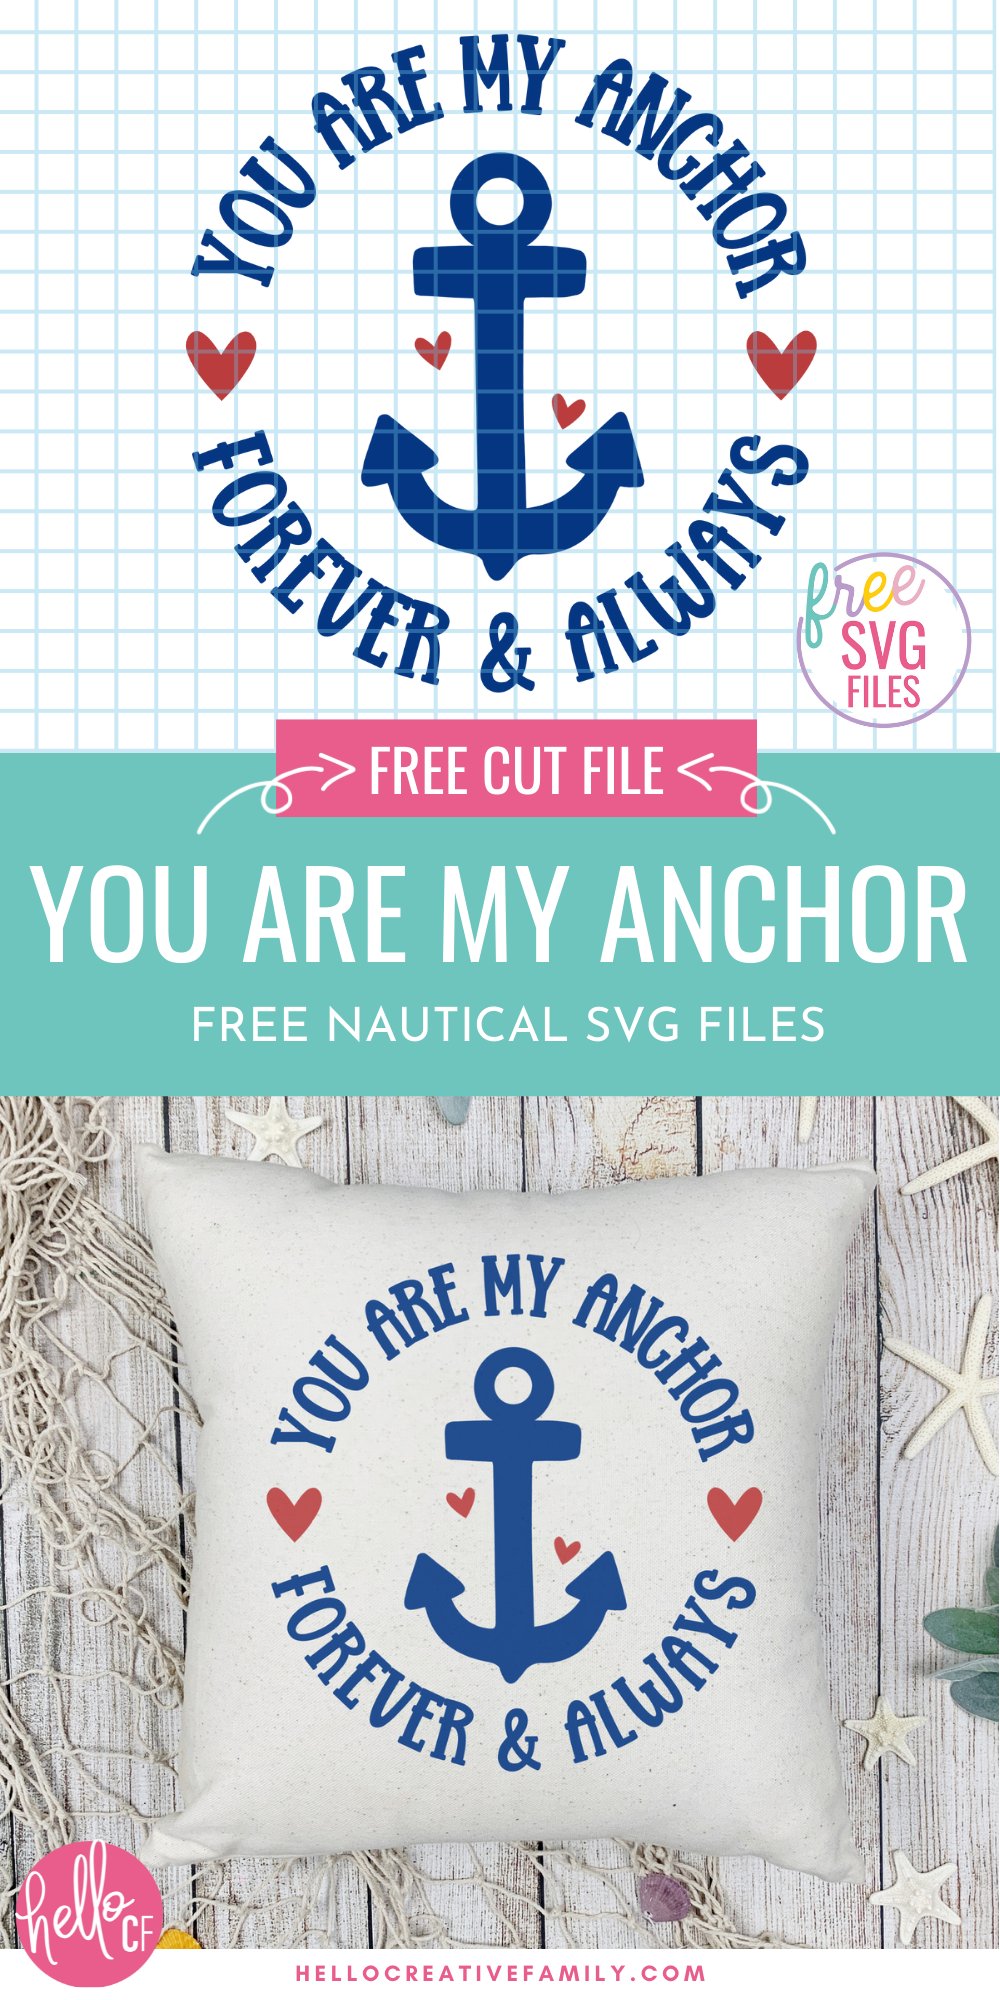 Get ready for time at the beach, cottage or cabin with these free Nautical SVG Files including a You Are My Anchor cut file! Make your own t-shirts, tank tops, hats, beach bags, mugs, stencils, decals and all kinds of beach gear using these free cut files and your Cricut Maker, Cricut Explore or Cricut Joy!